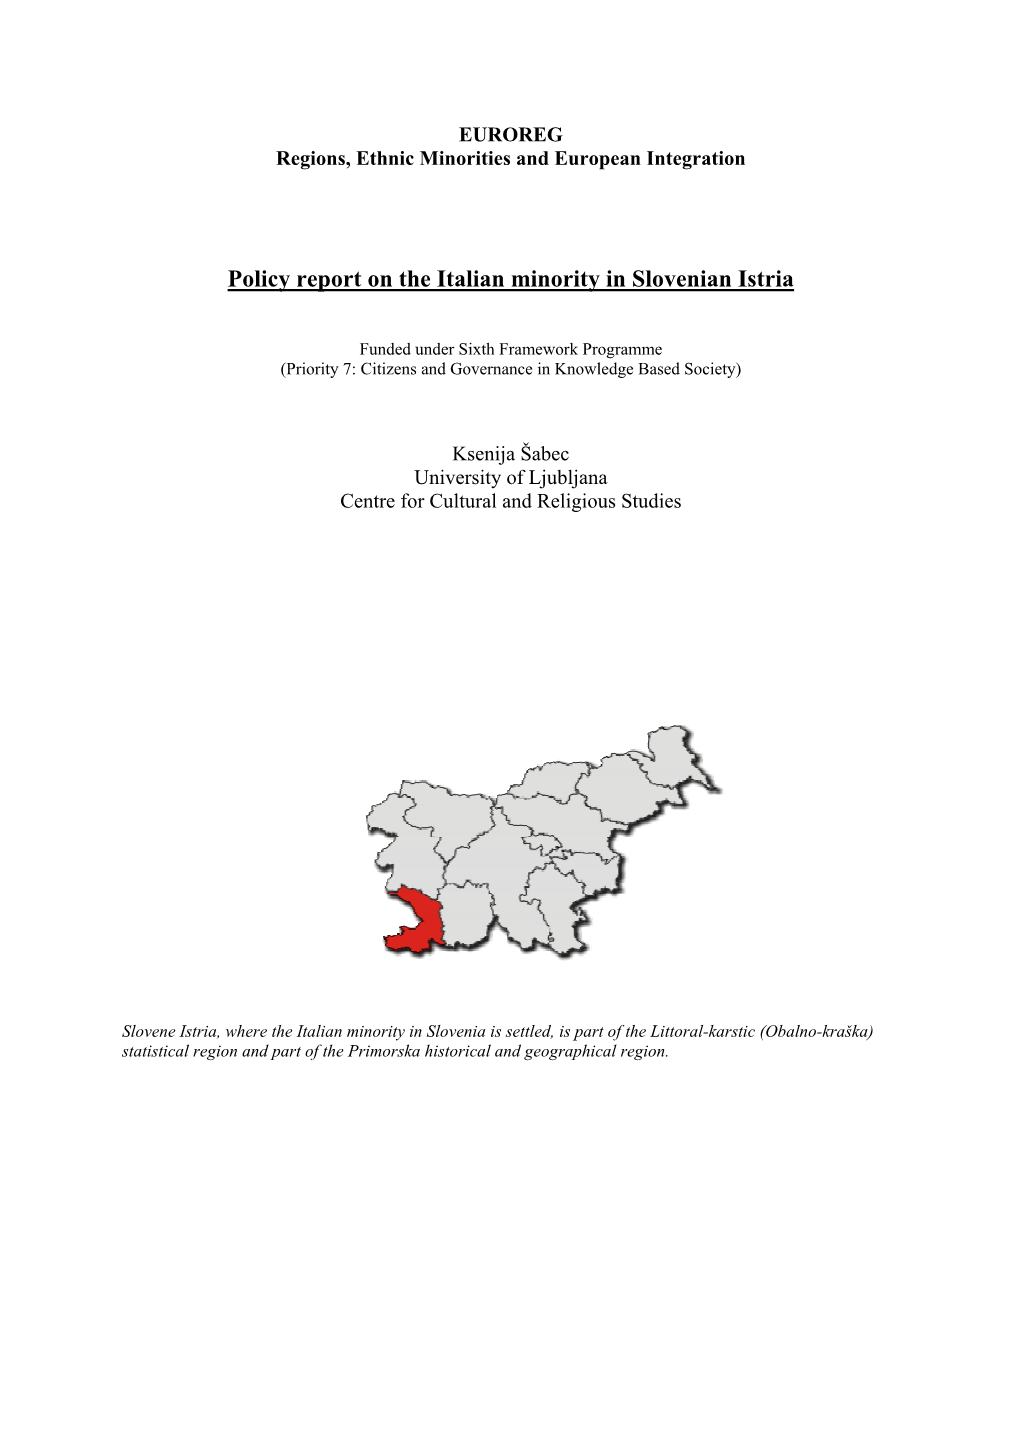 Policy Report on the Italian Minority in Slovenian Istria